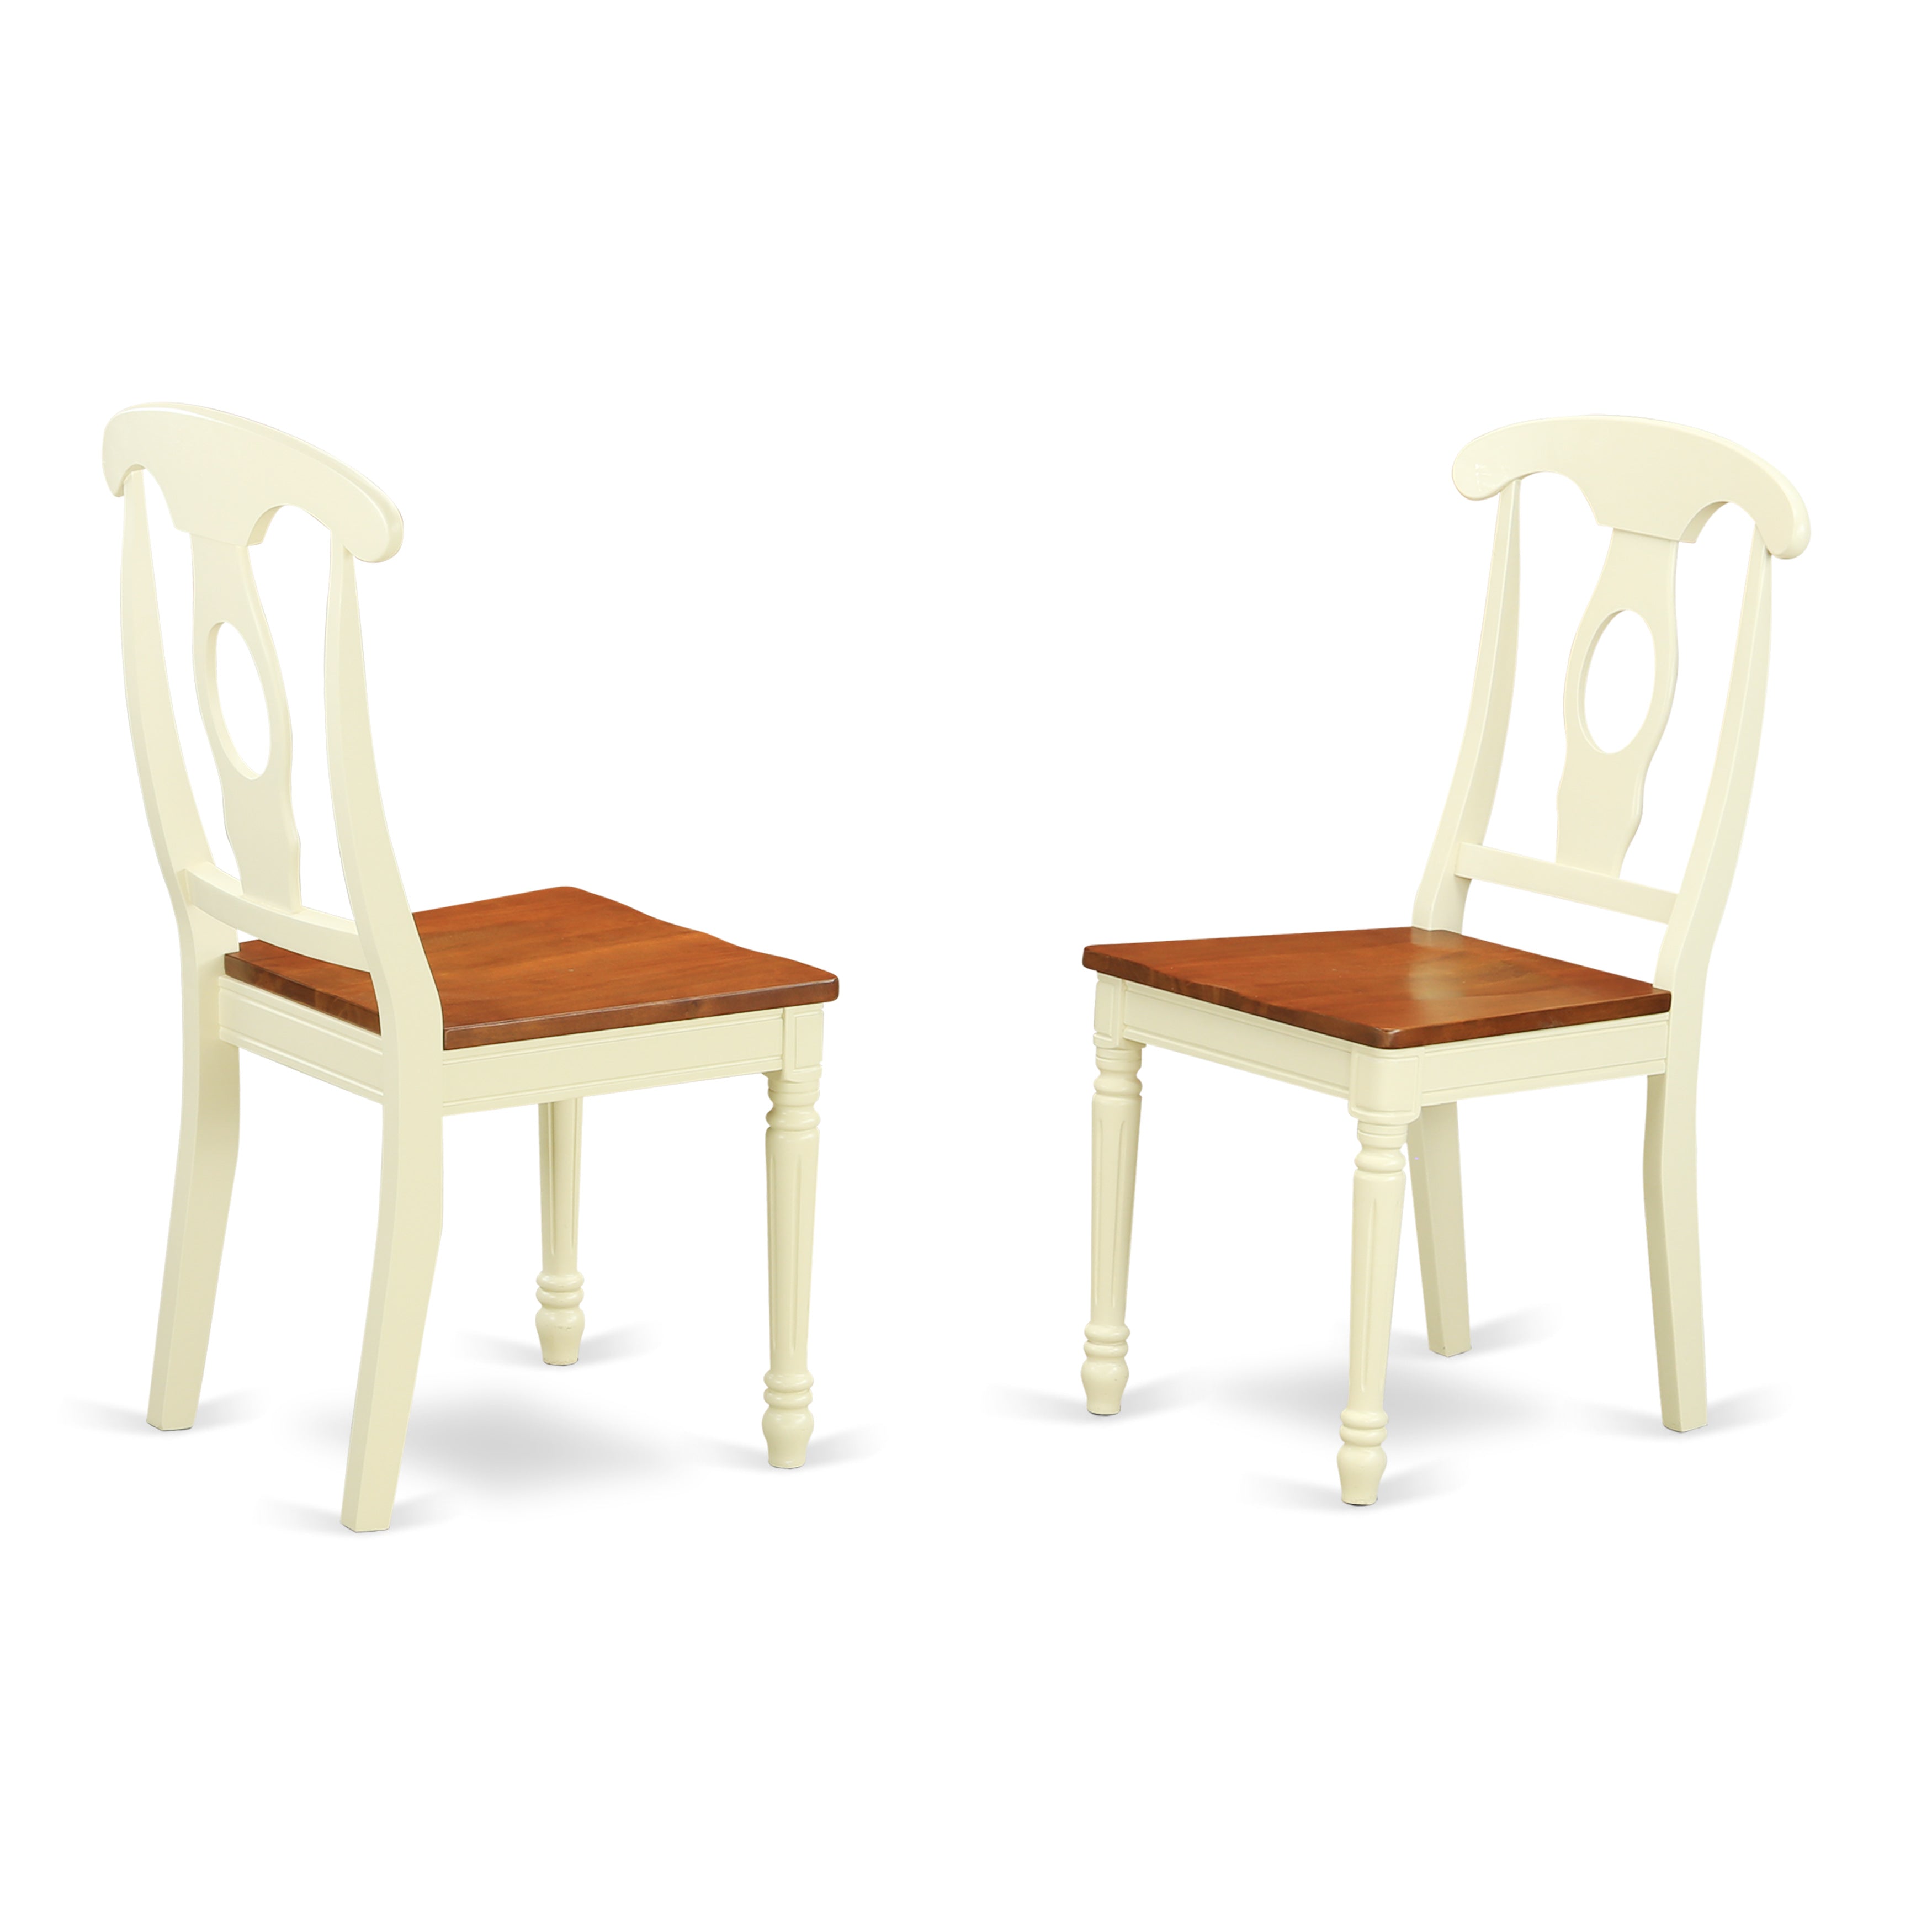 KEC-WHI-W Napoleon styled chair with Wood seat